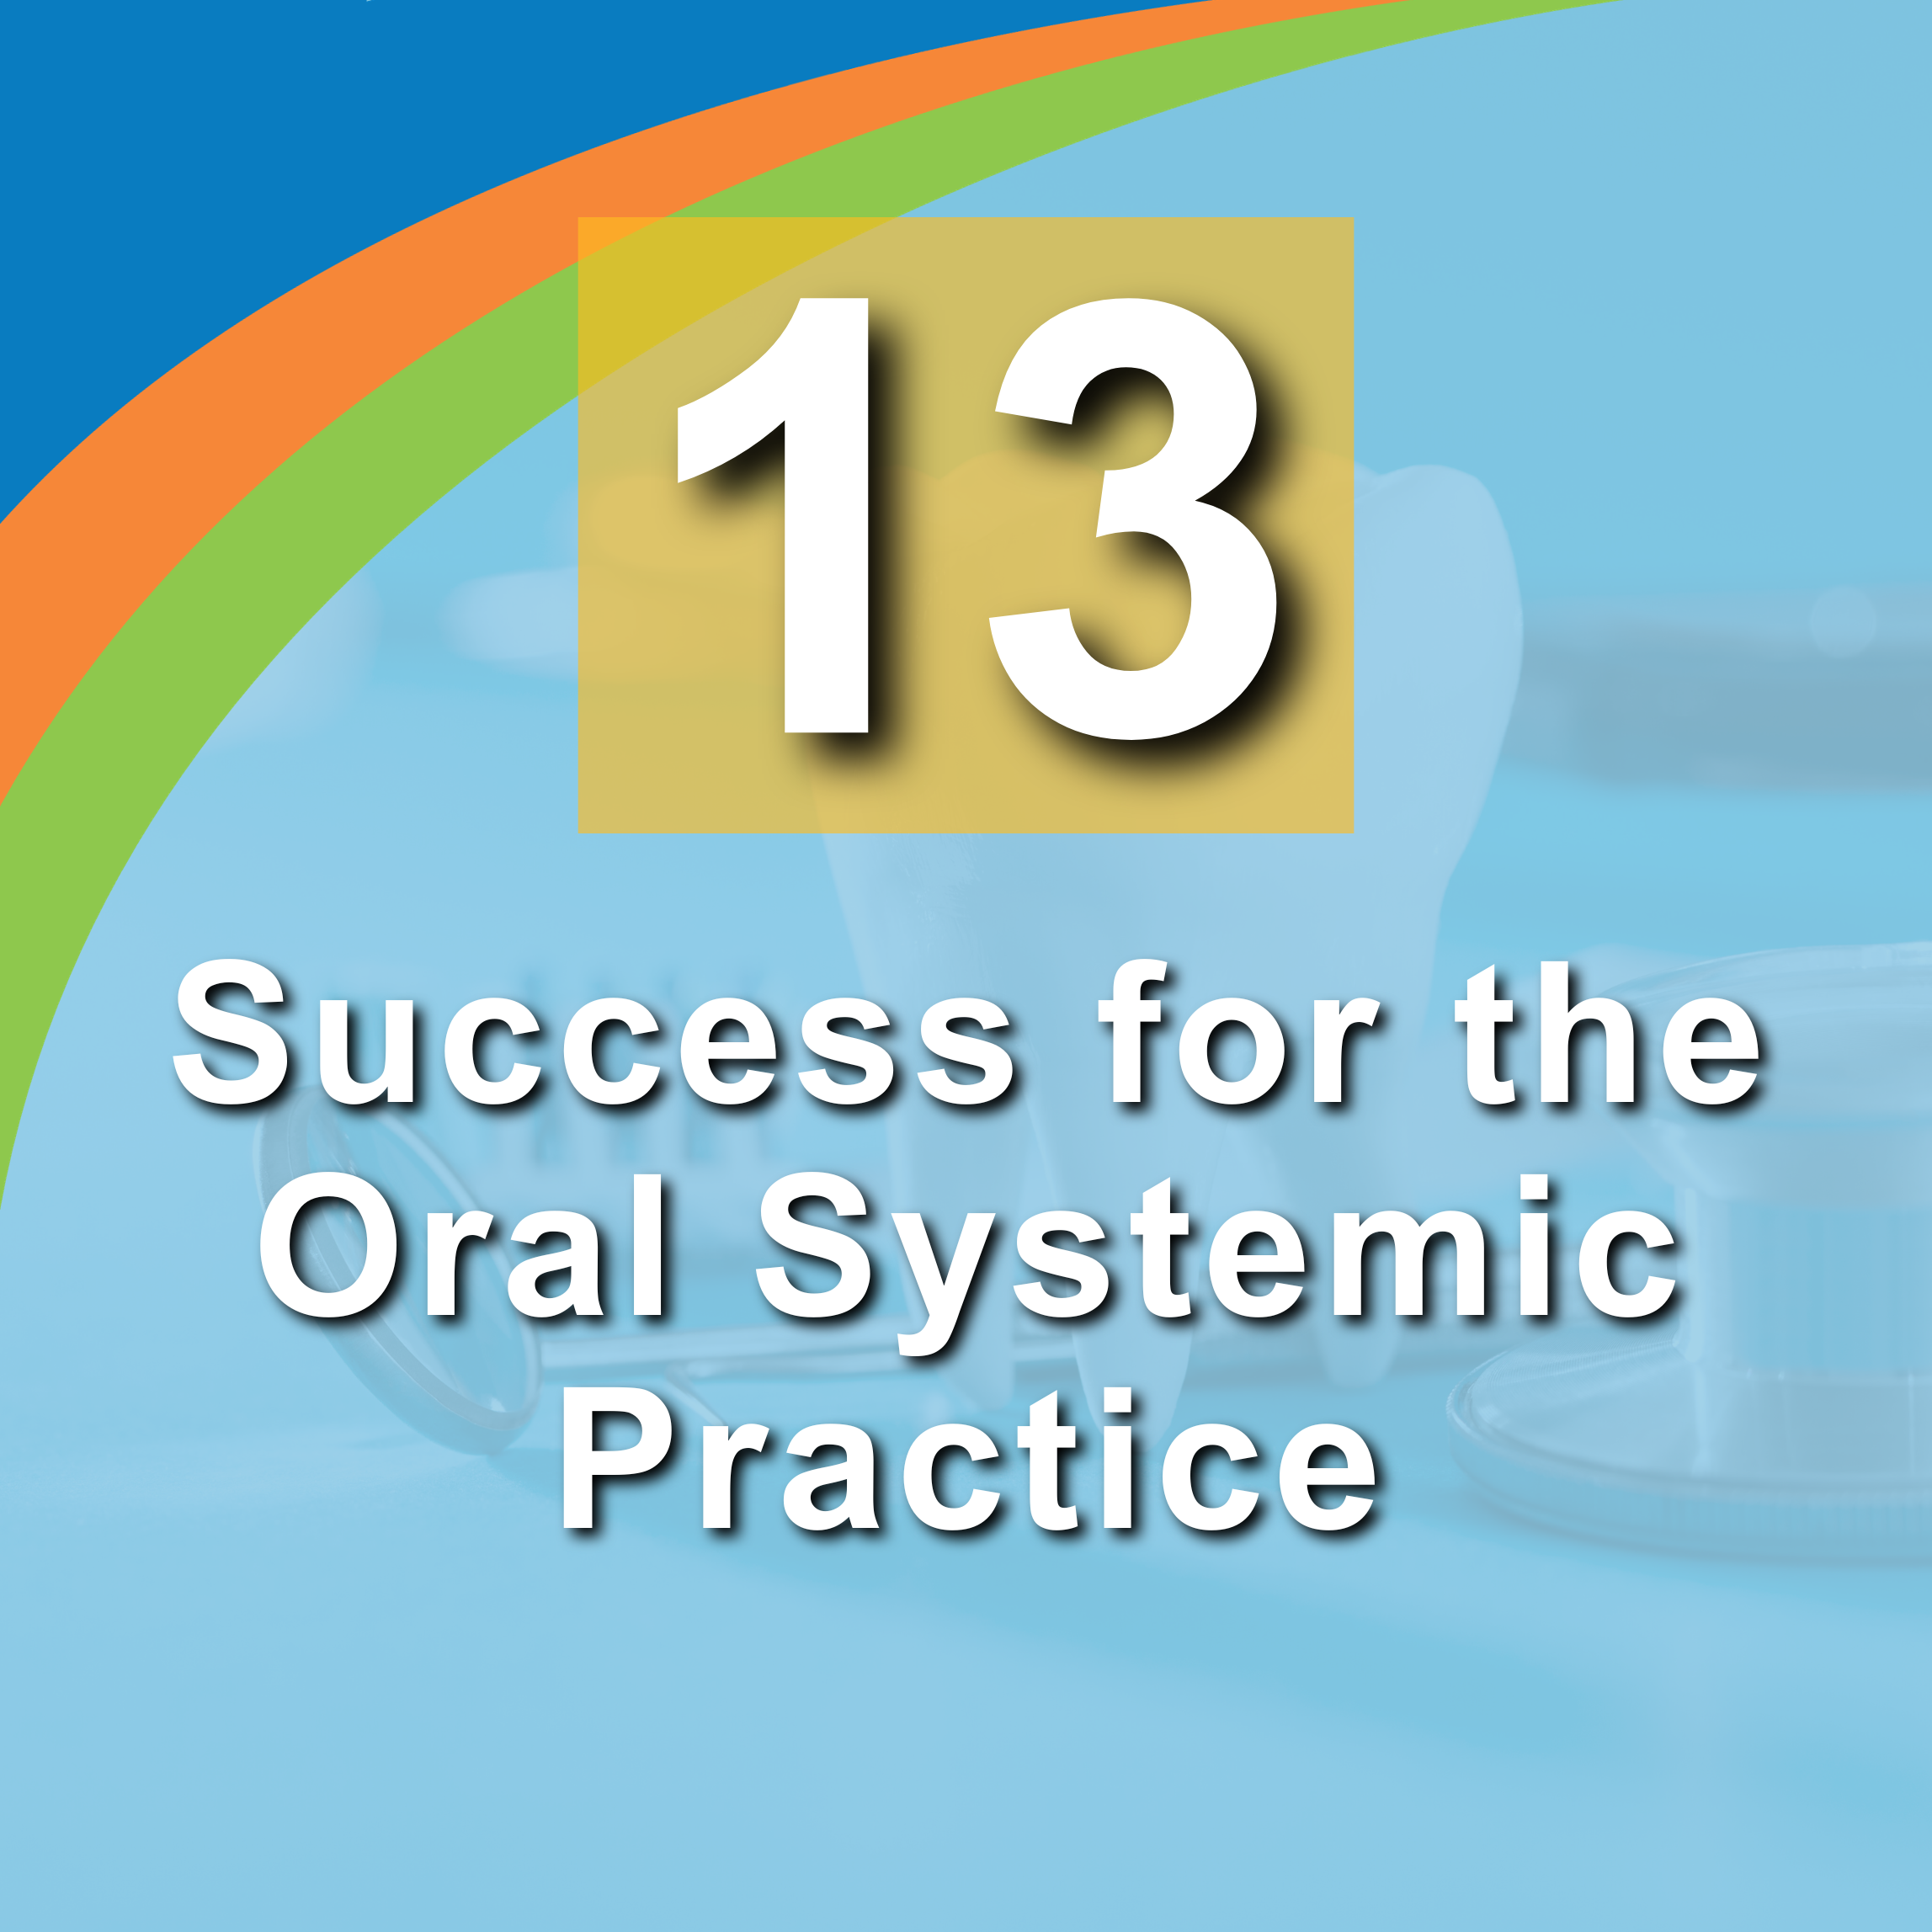 13. Success for the Oral Systemic Practice